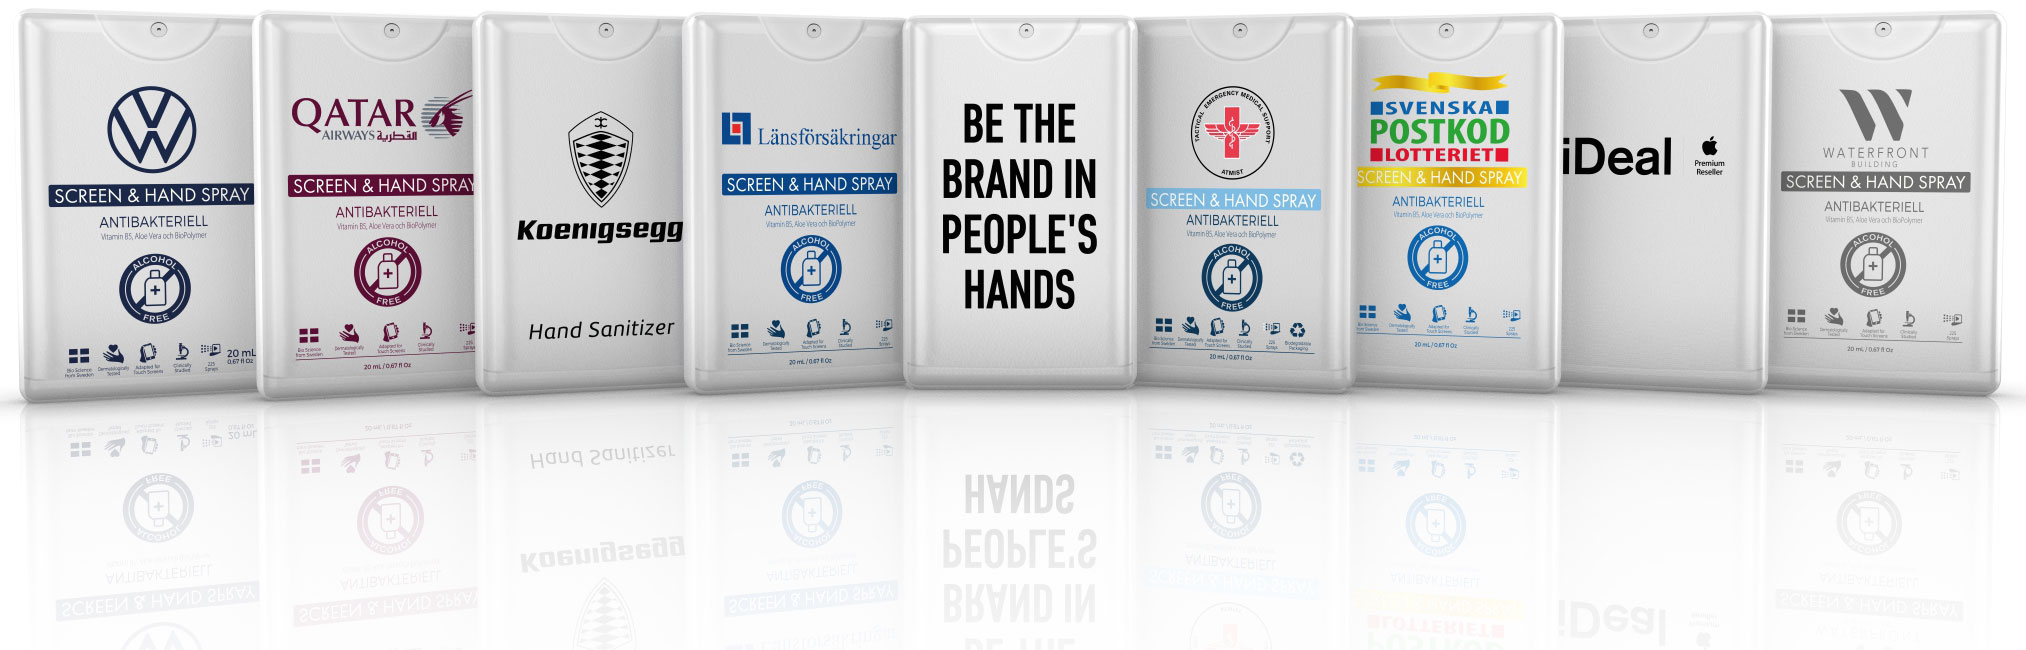 Be the brand in peoples hands